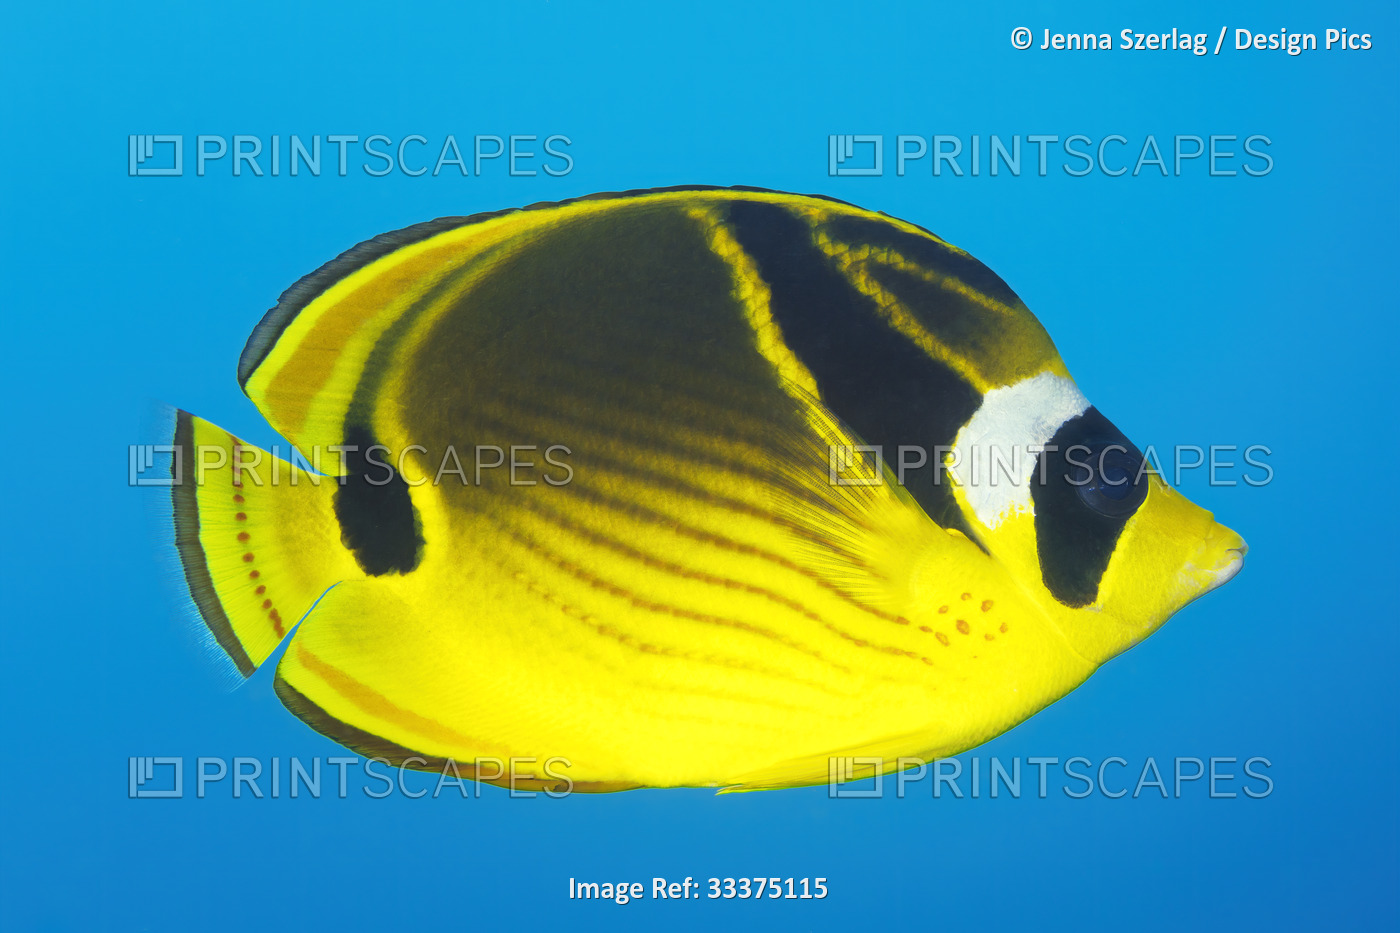 Close-up portrait of a racoon butterflyfish (Chaetodon lunula) swimming in ...